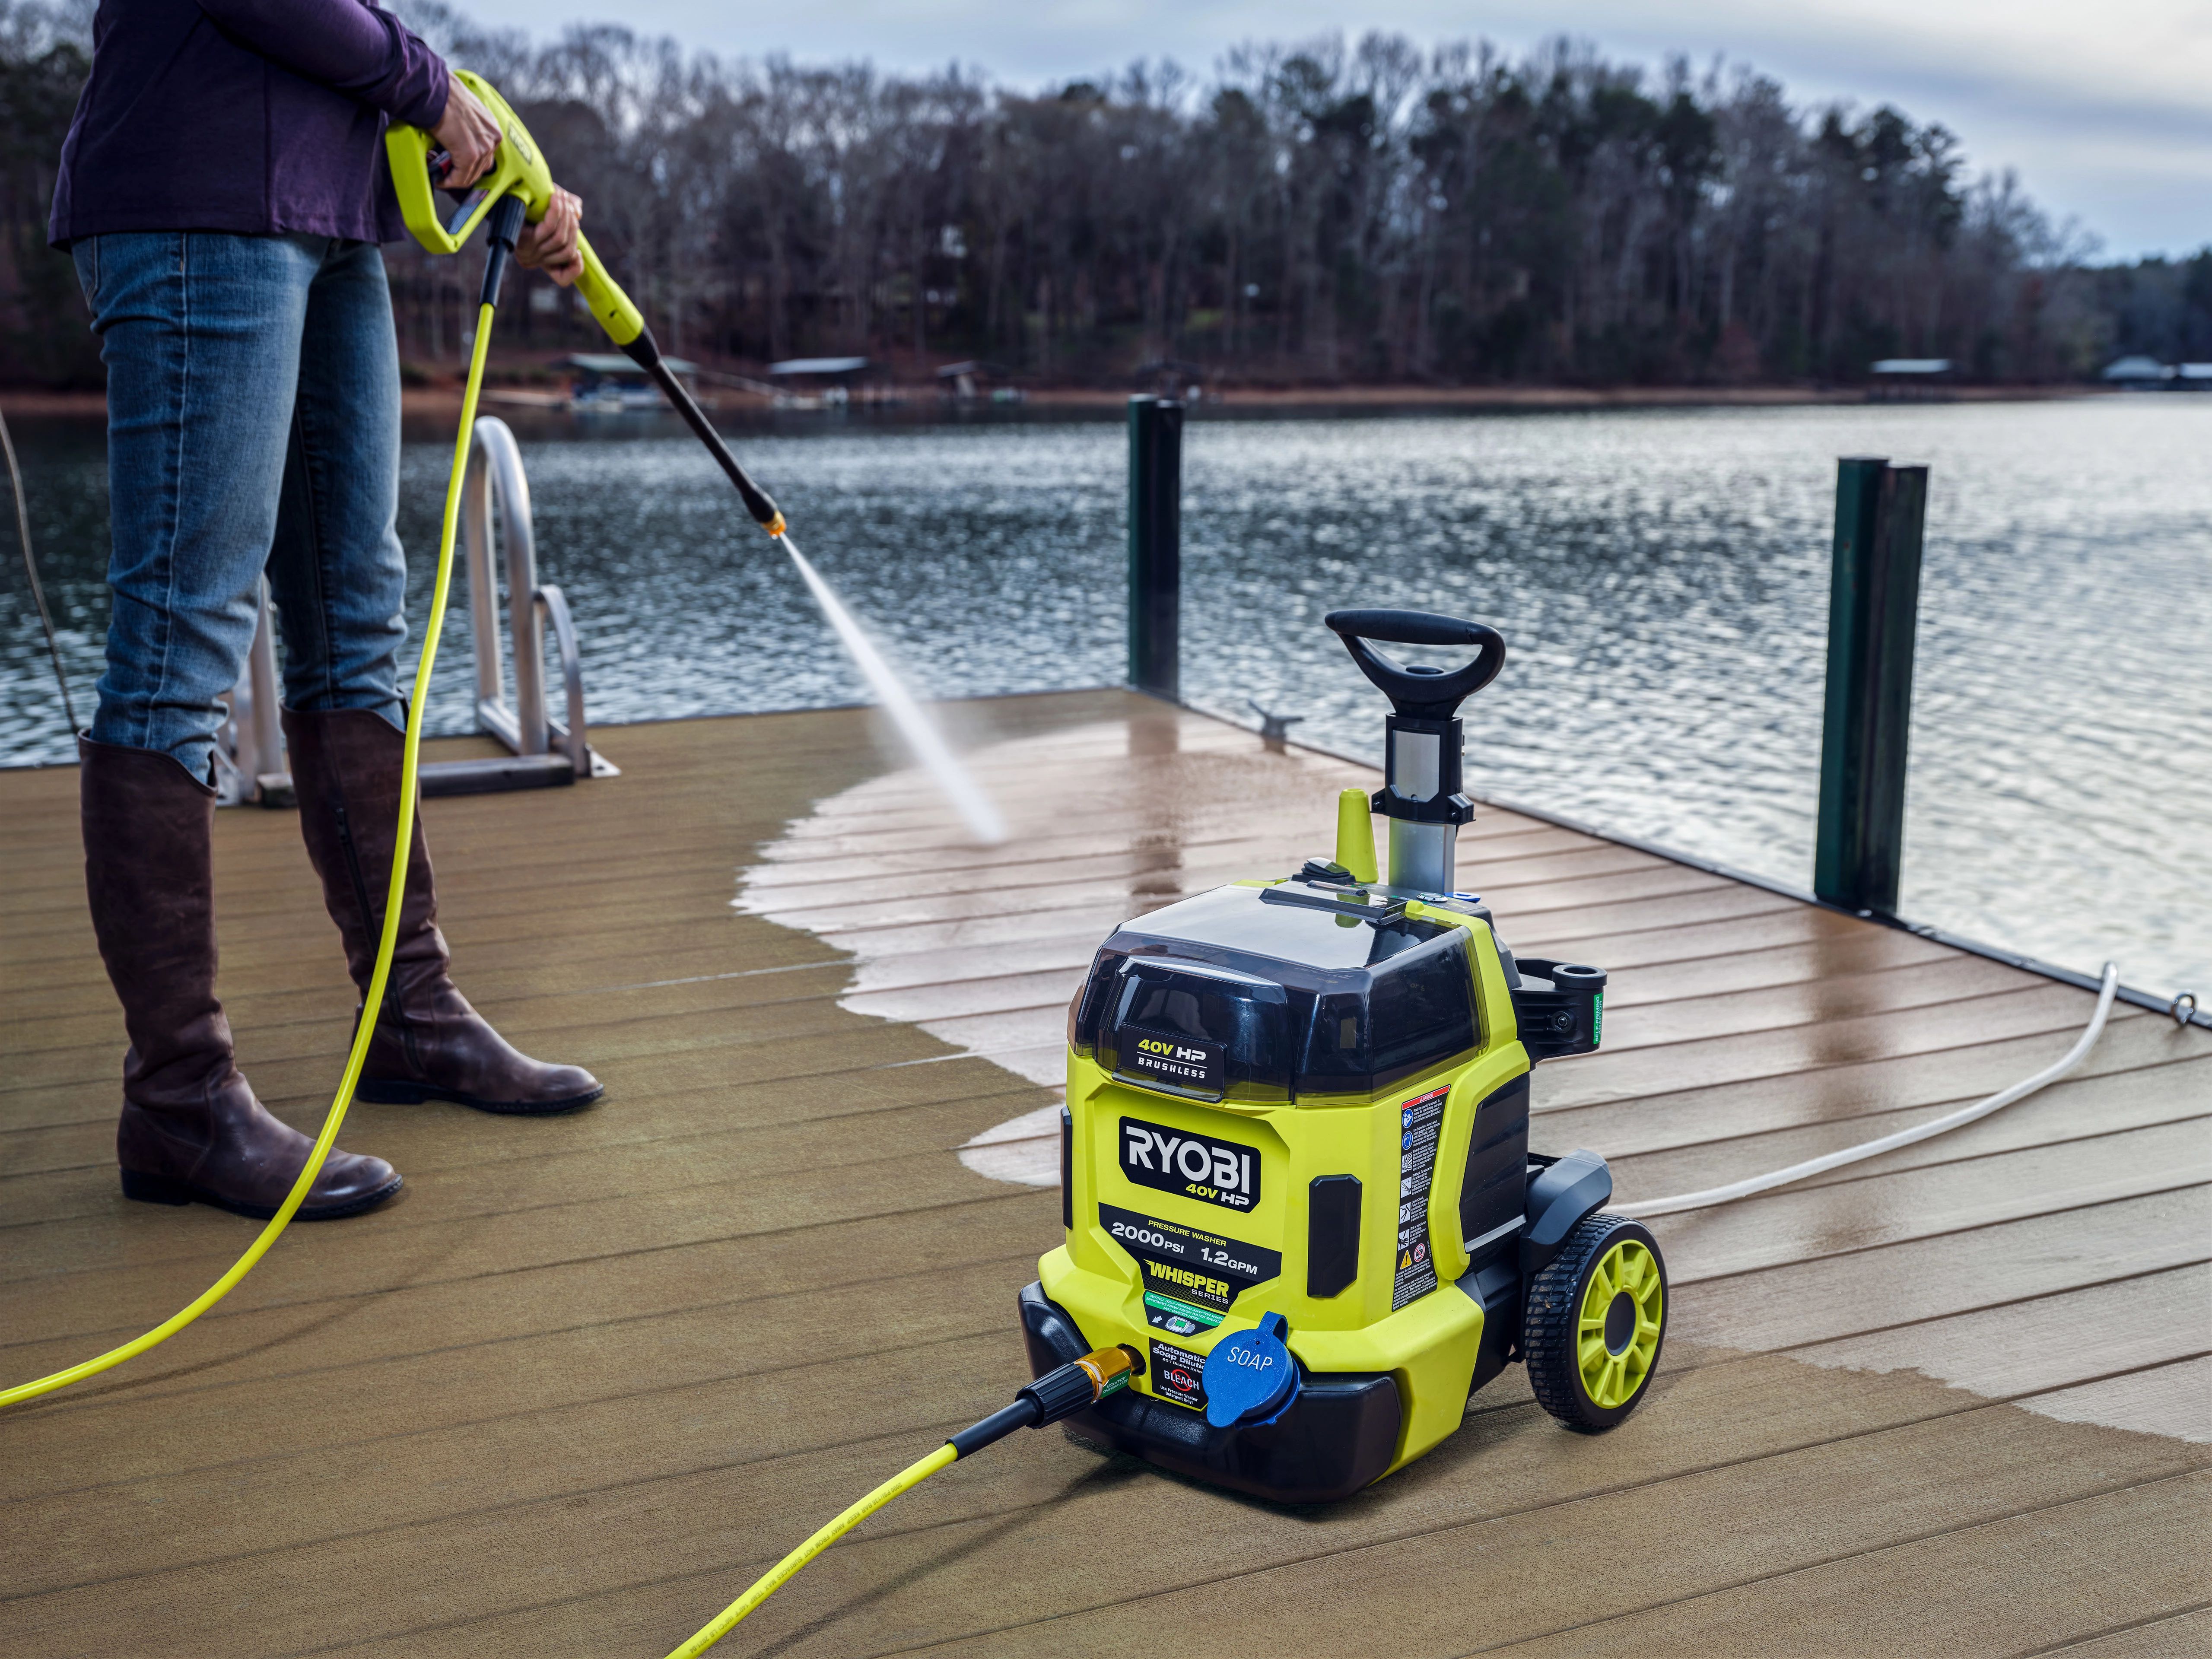 Brushless motor, advanced electronics and high performance lithium technology delivers up to 2,000 PSI, making this pressure washer 